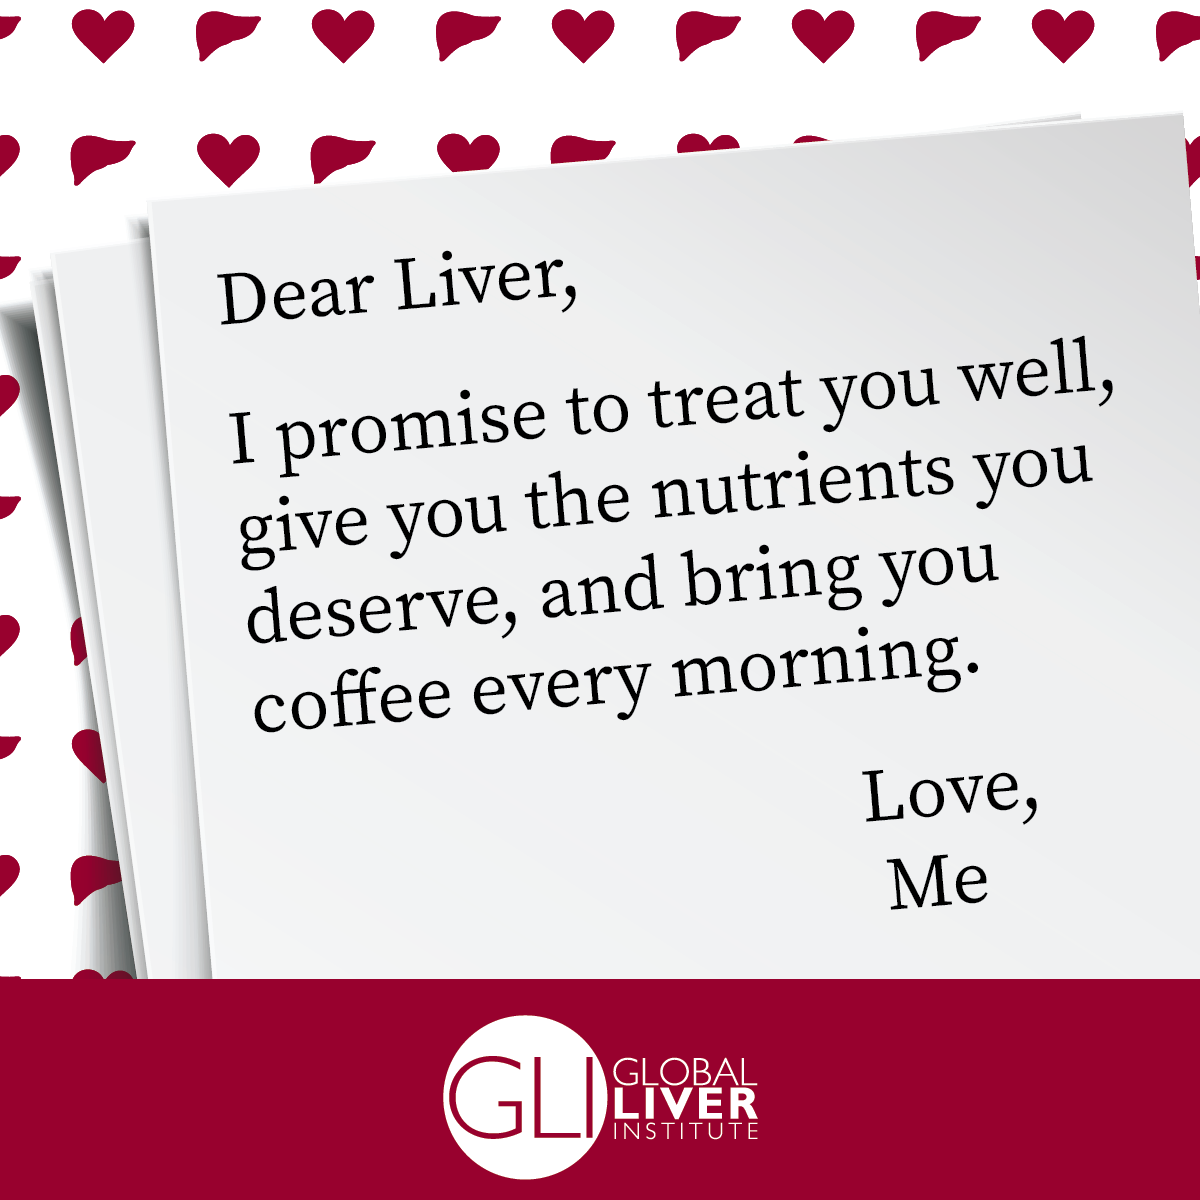 love-letter-to-liver09.png